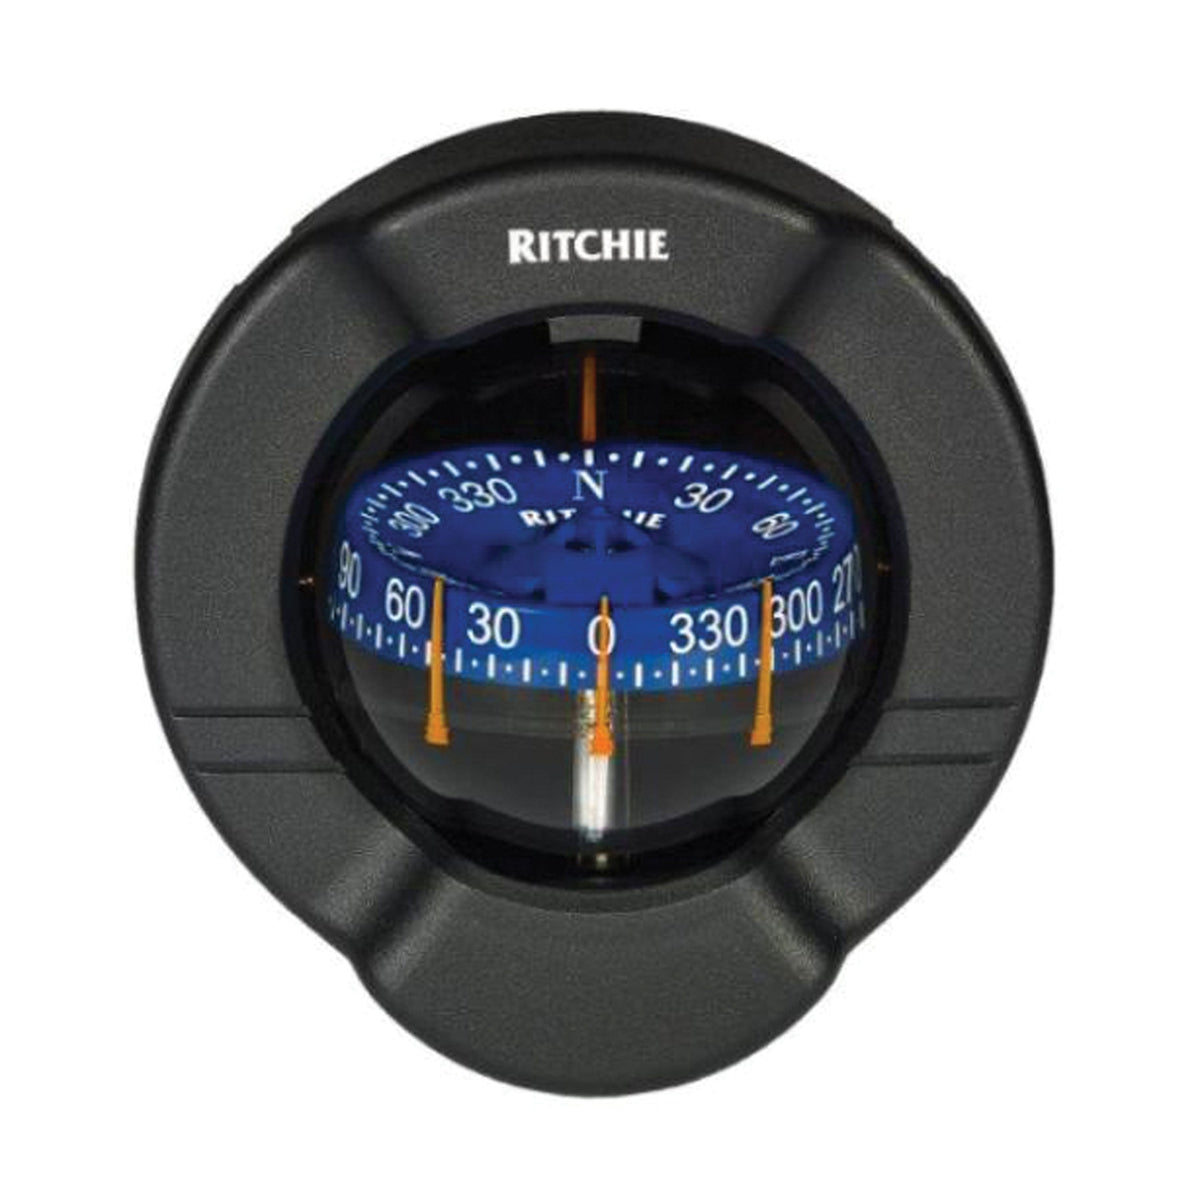 Ritchie Compass Qualifies for Free Shipping Ritchie Compass Venture Bulkhead Mount Compass CombiDial Black with Blue Dial #SR-2-1